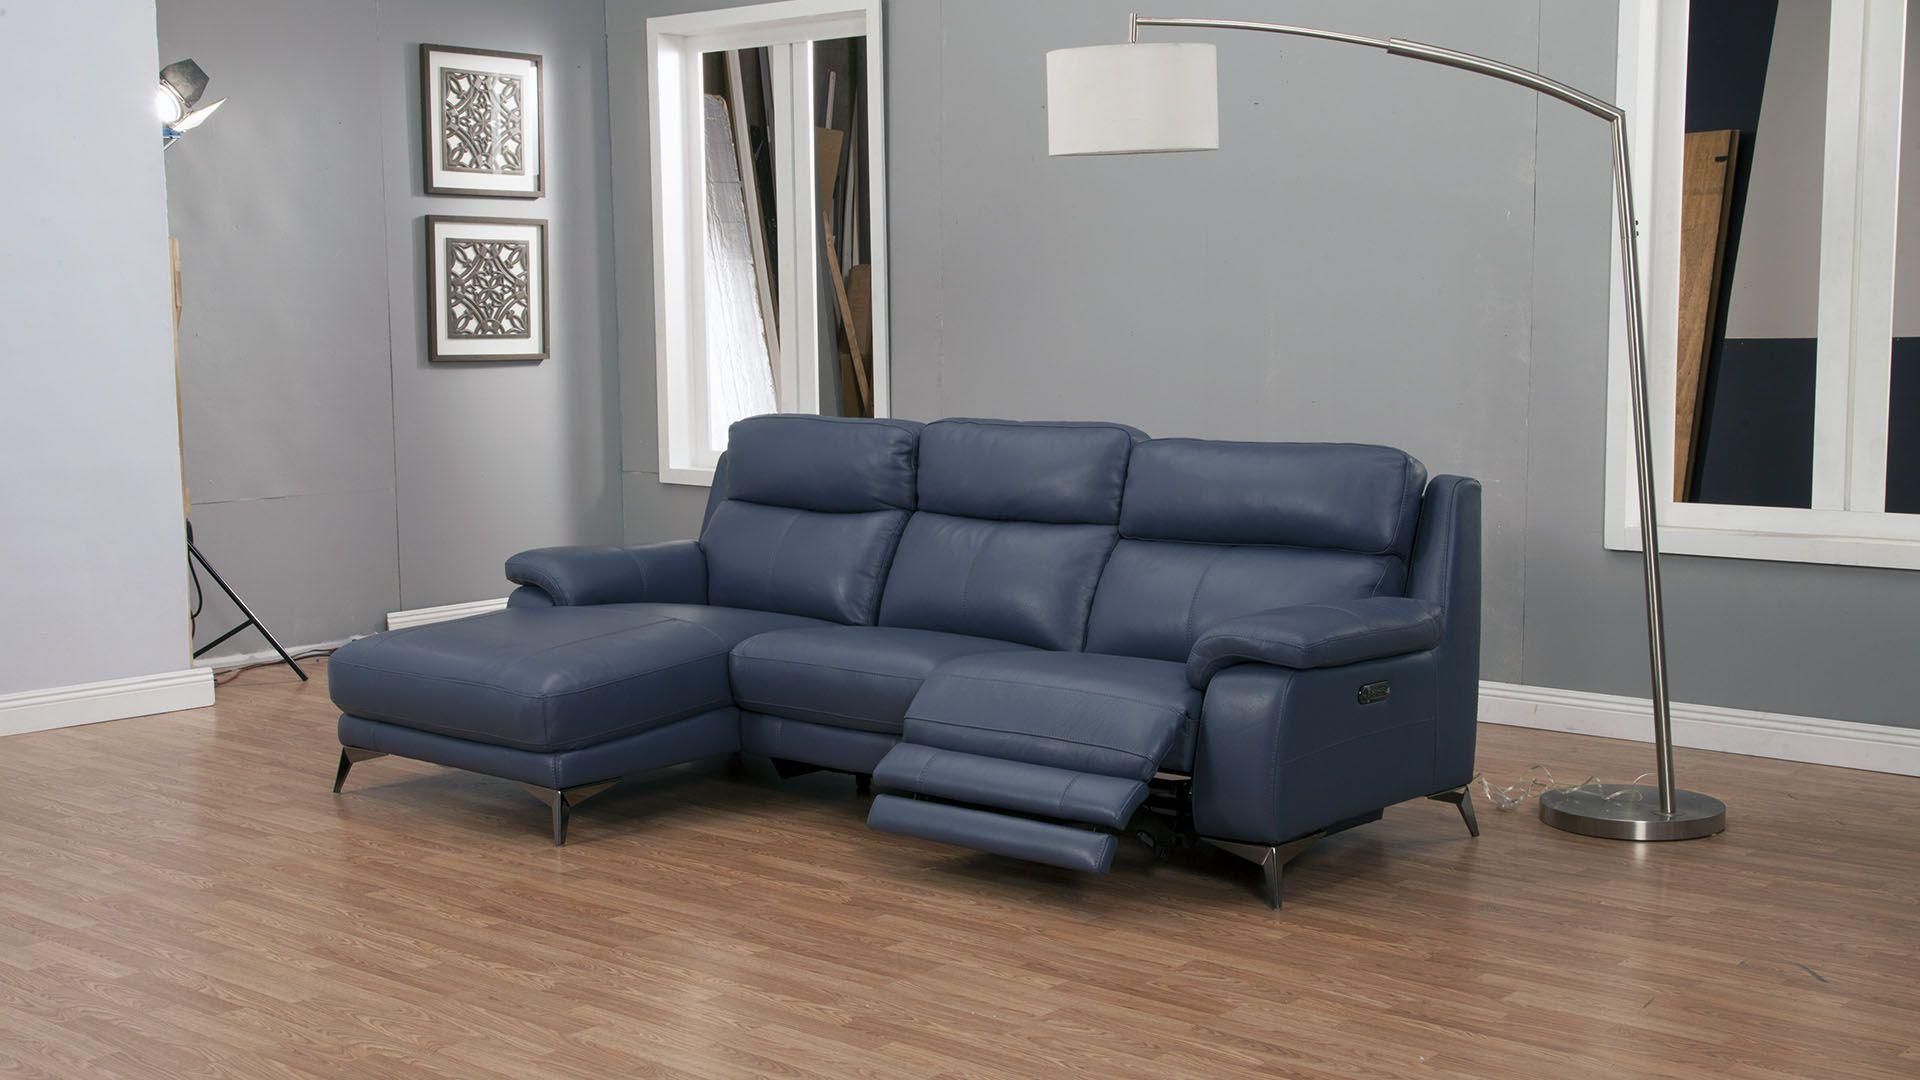 Blue Top Grain Cow Hide Power Recliner Sectional Right Throughout Bloutop Upholstered Sectional Sofas (View 14 of 15)